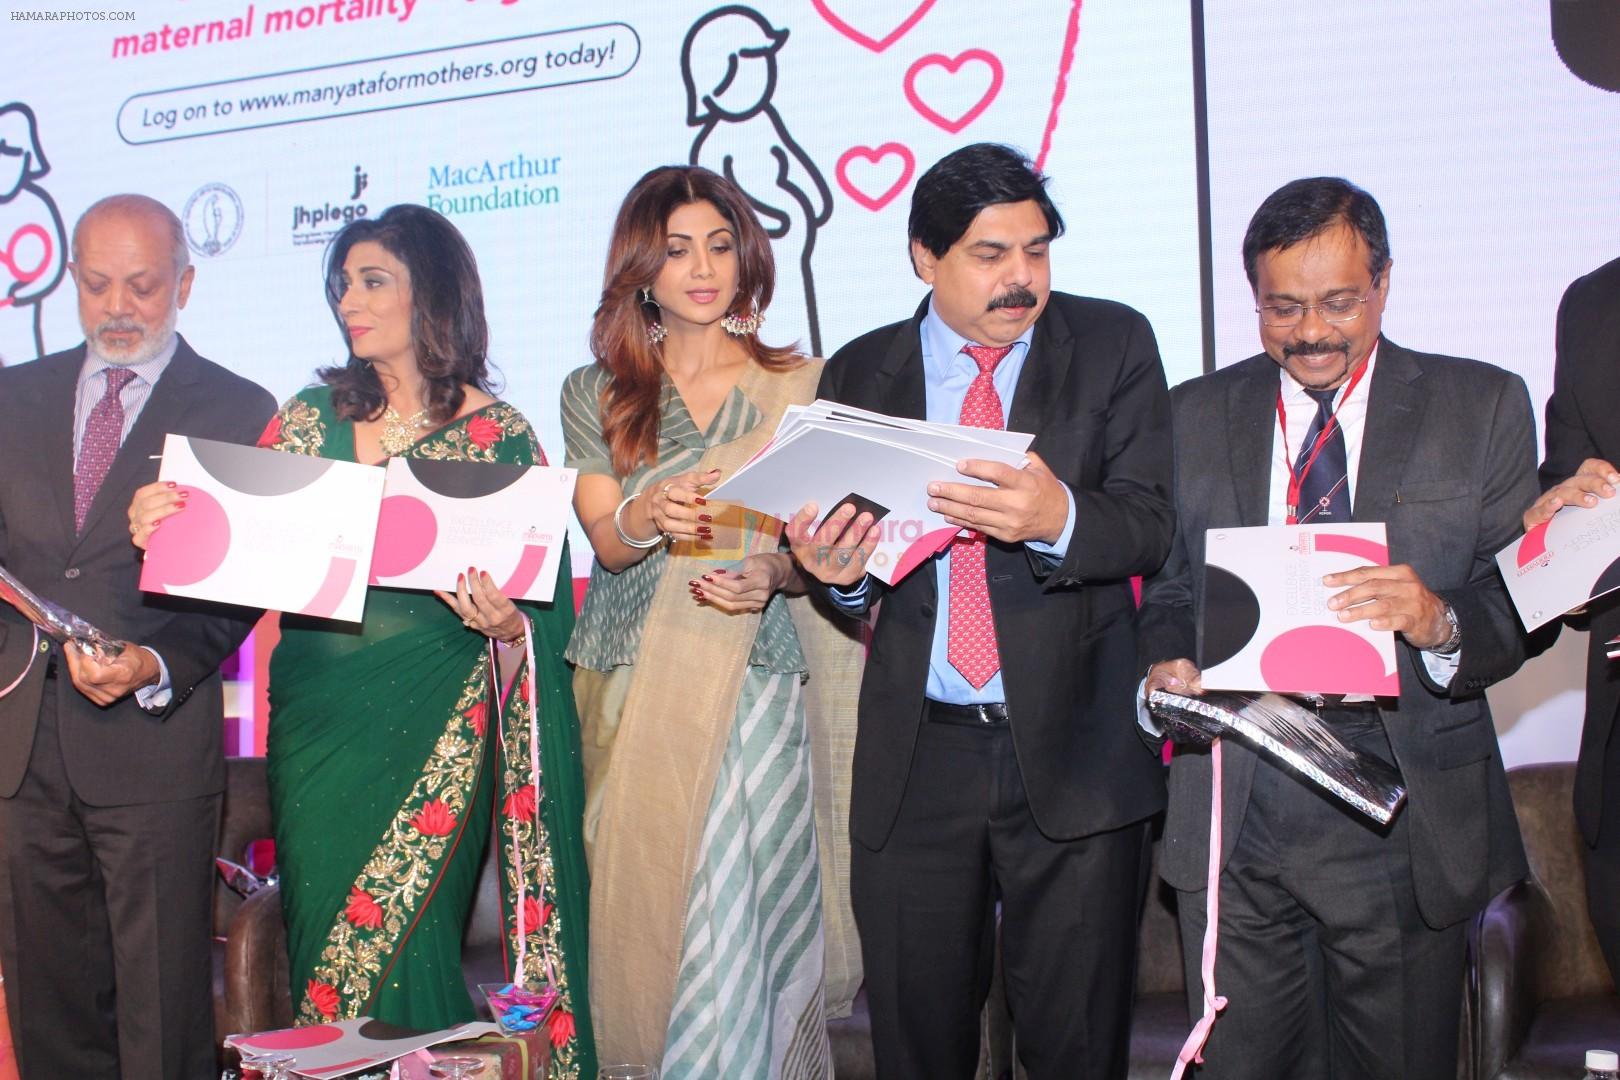 Shilpa Shetty Inaugurate A Movement On Quality Maternal Care In India on 18th Nov 2017